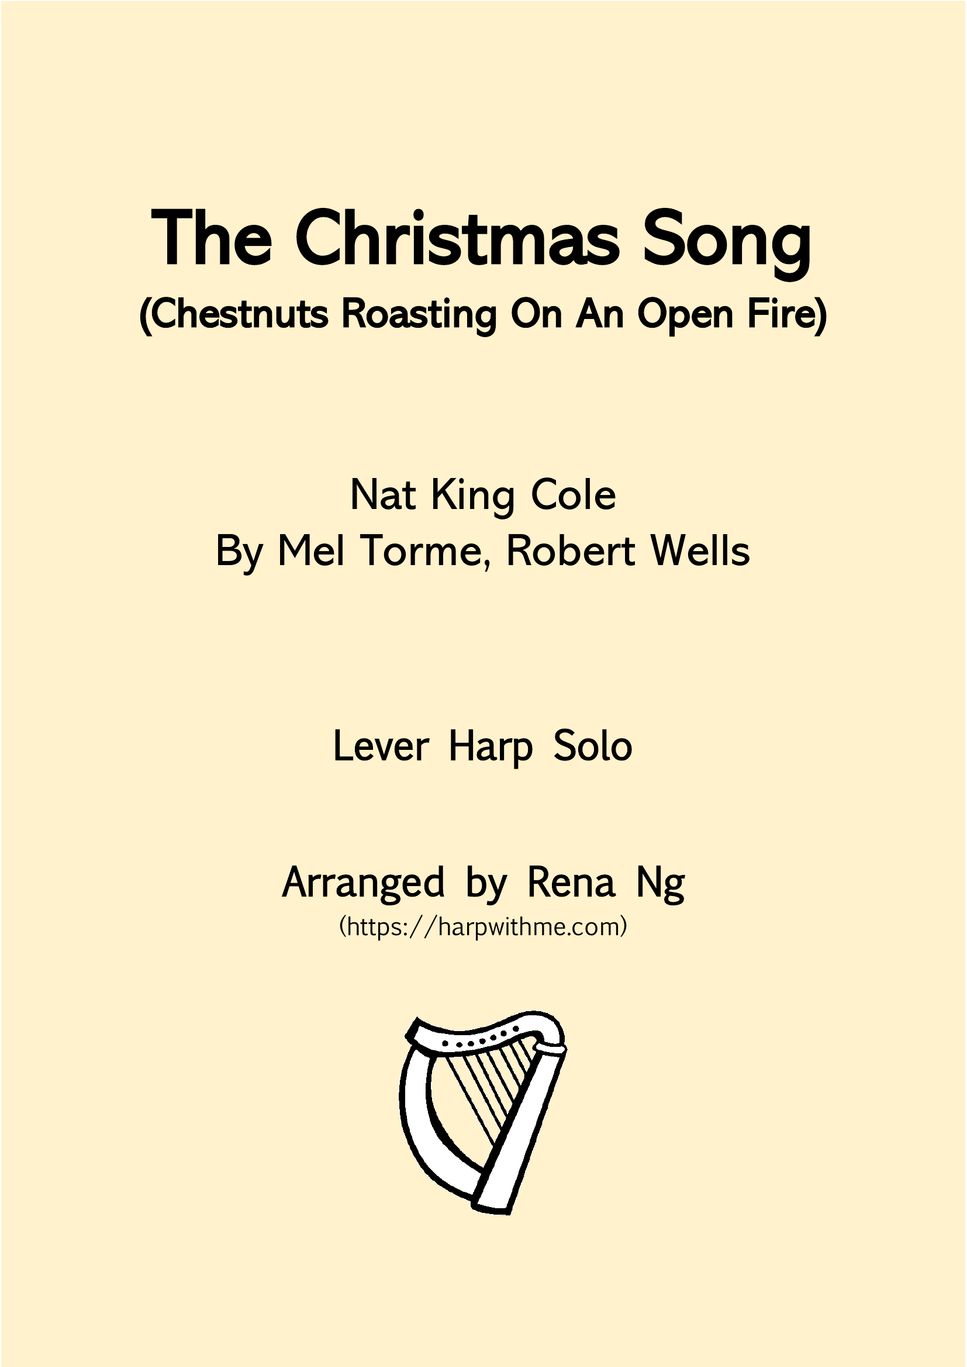 Nat King Cole - The Christmas Song [Chestnuts Roasting] (Lever Harp Solo) - Advanced Intermediate by Harp With Me